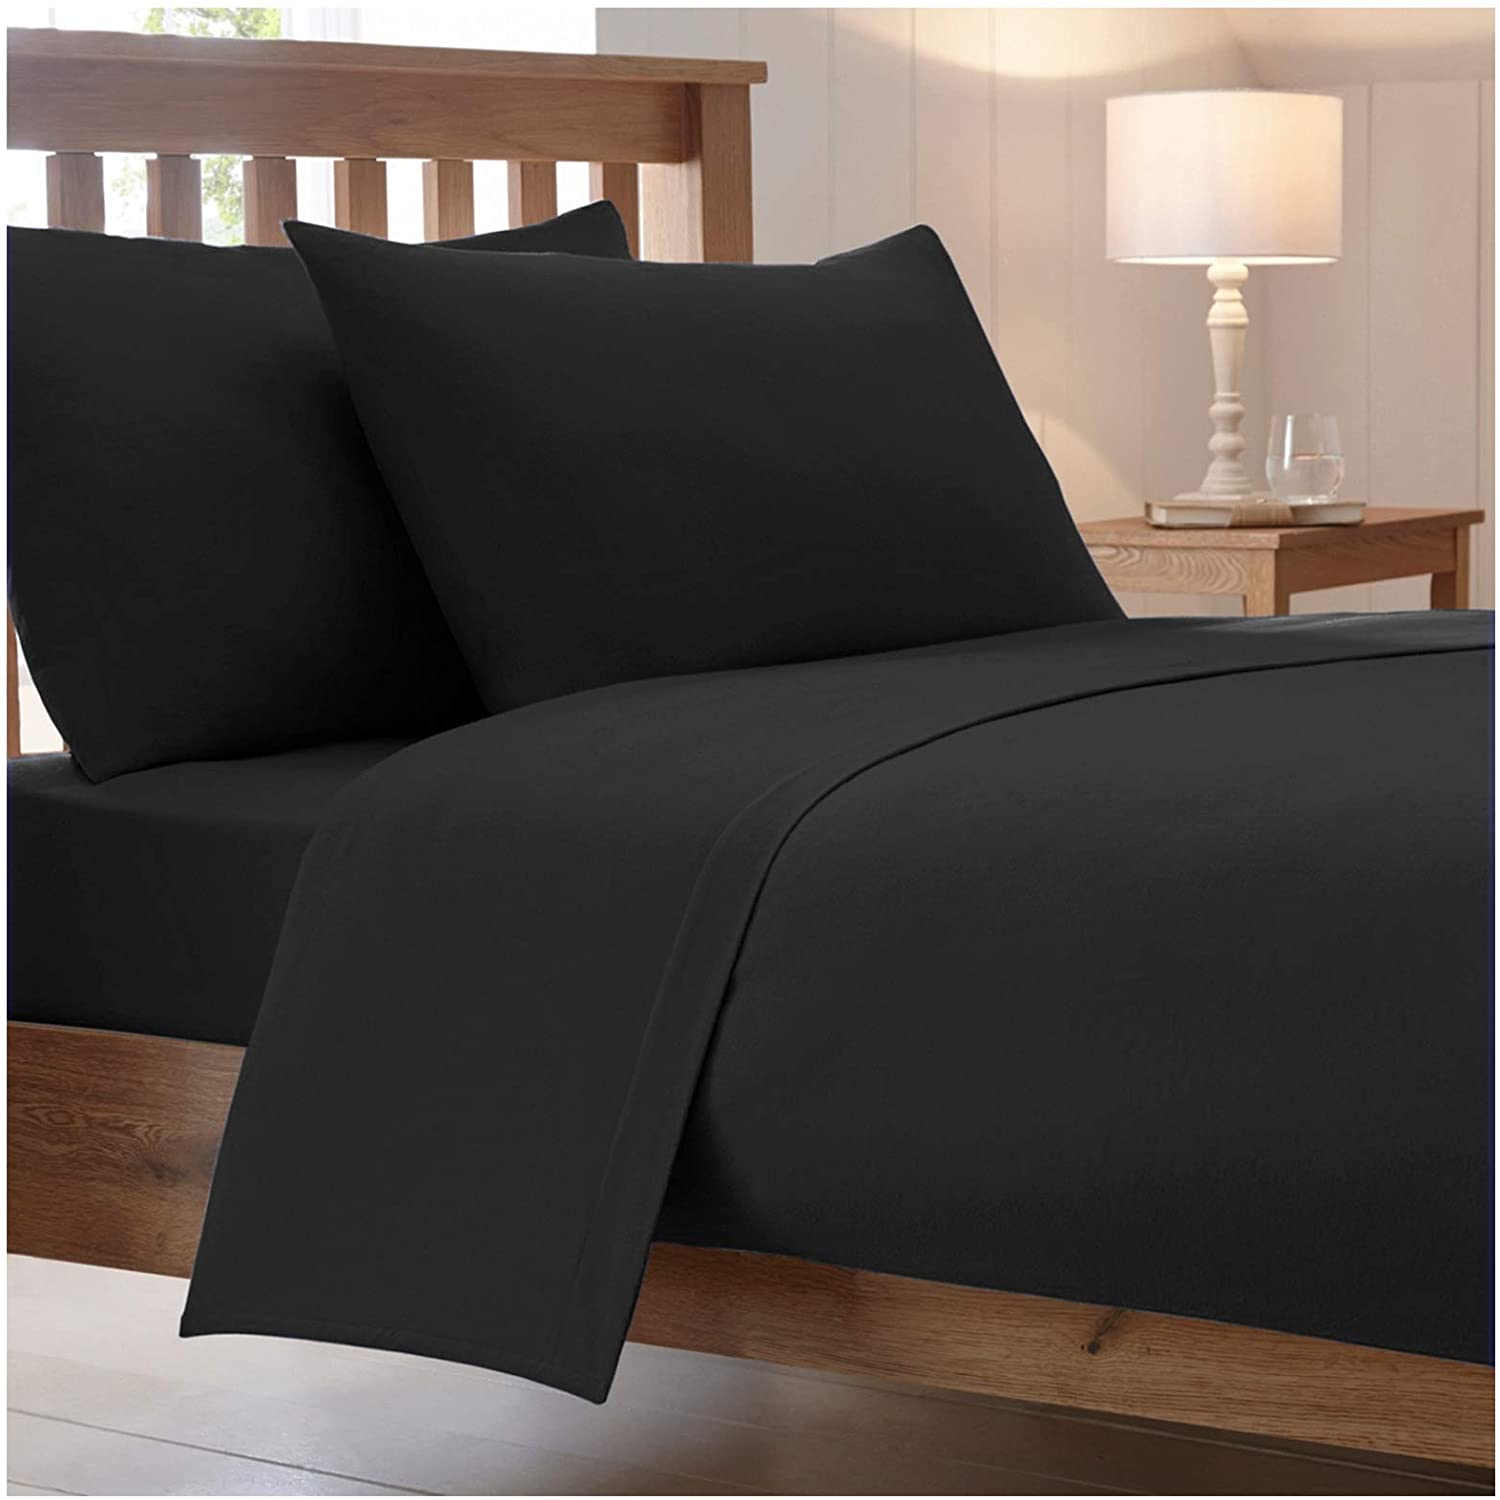 Catherine Lansfield, Combed Percale Non-Iron Sheeting, Black, 3 sizes